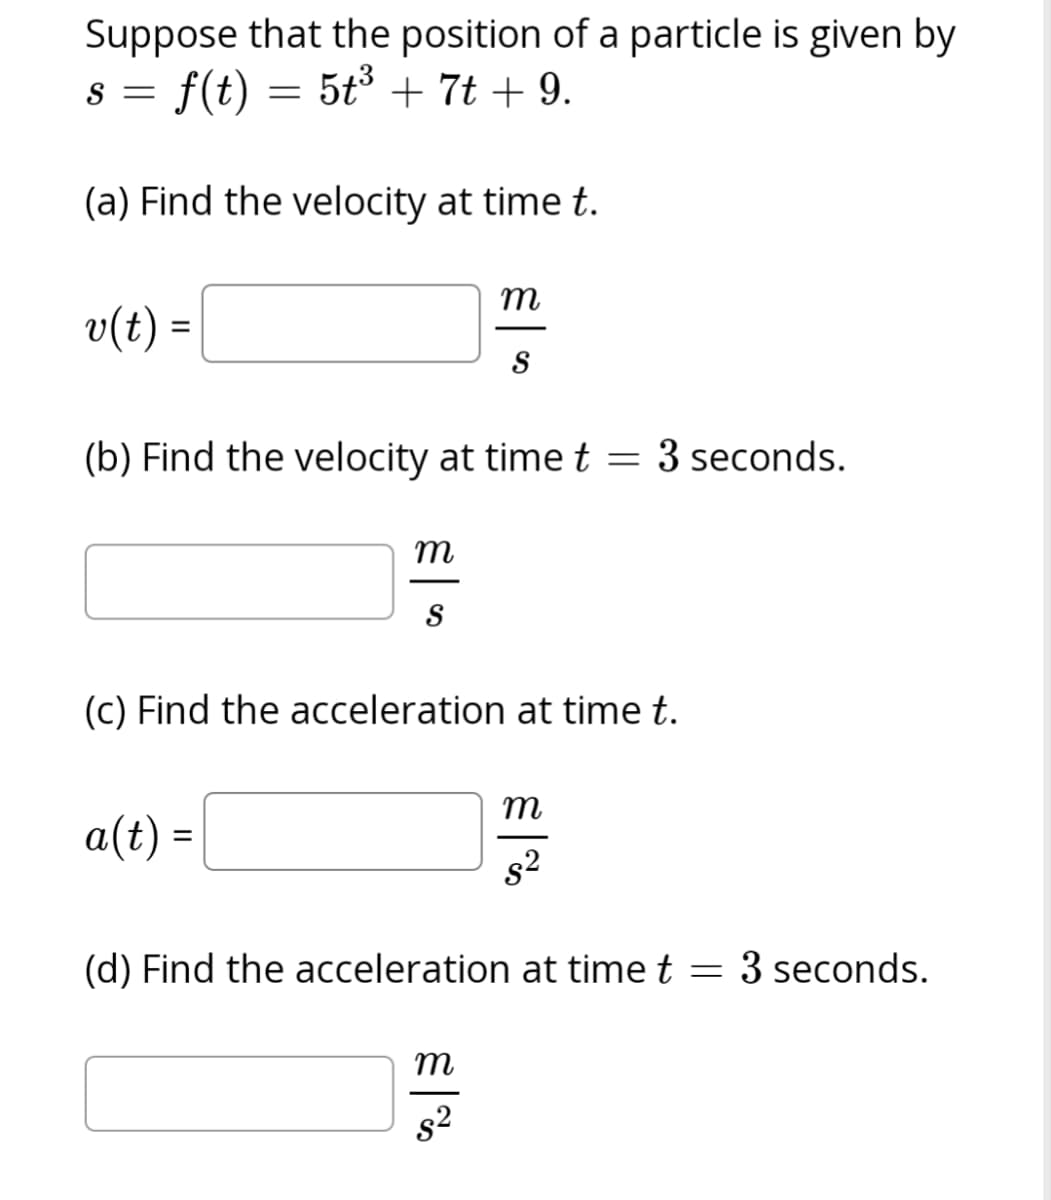 Suppose that the position of a particle is given by
s = f(t) = 5t³ + 7t + 9.
(a) Find the velocity at time t.
v(t) =
(b) Find the velocity at time t = 3 seconds.
m
S
a(t) =
(c) Find the acceleration at time t.
m
S
m
(d) Find the acceleration at time t = 3 seconds.
8²
m
8²